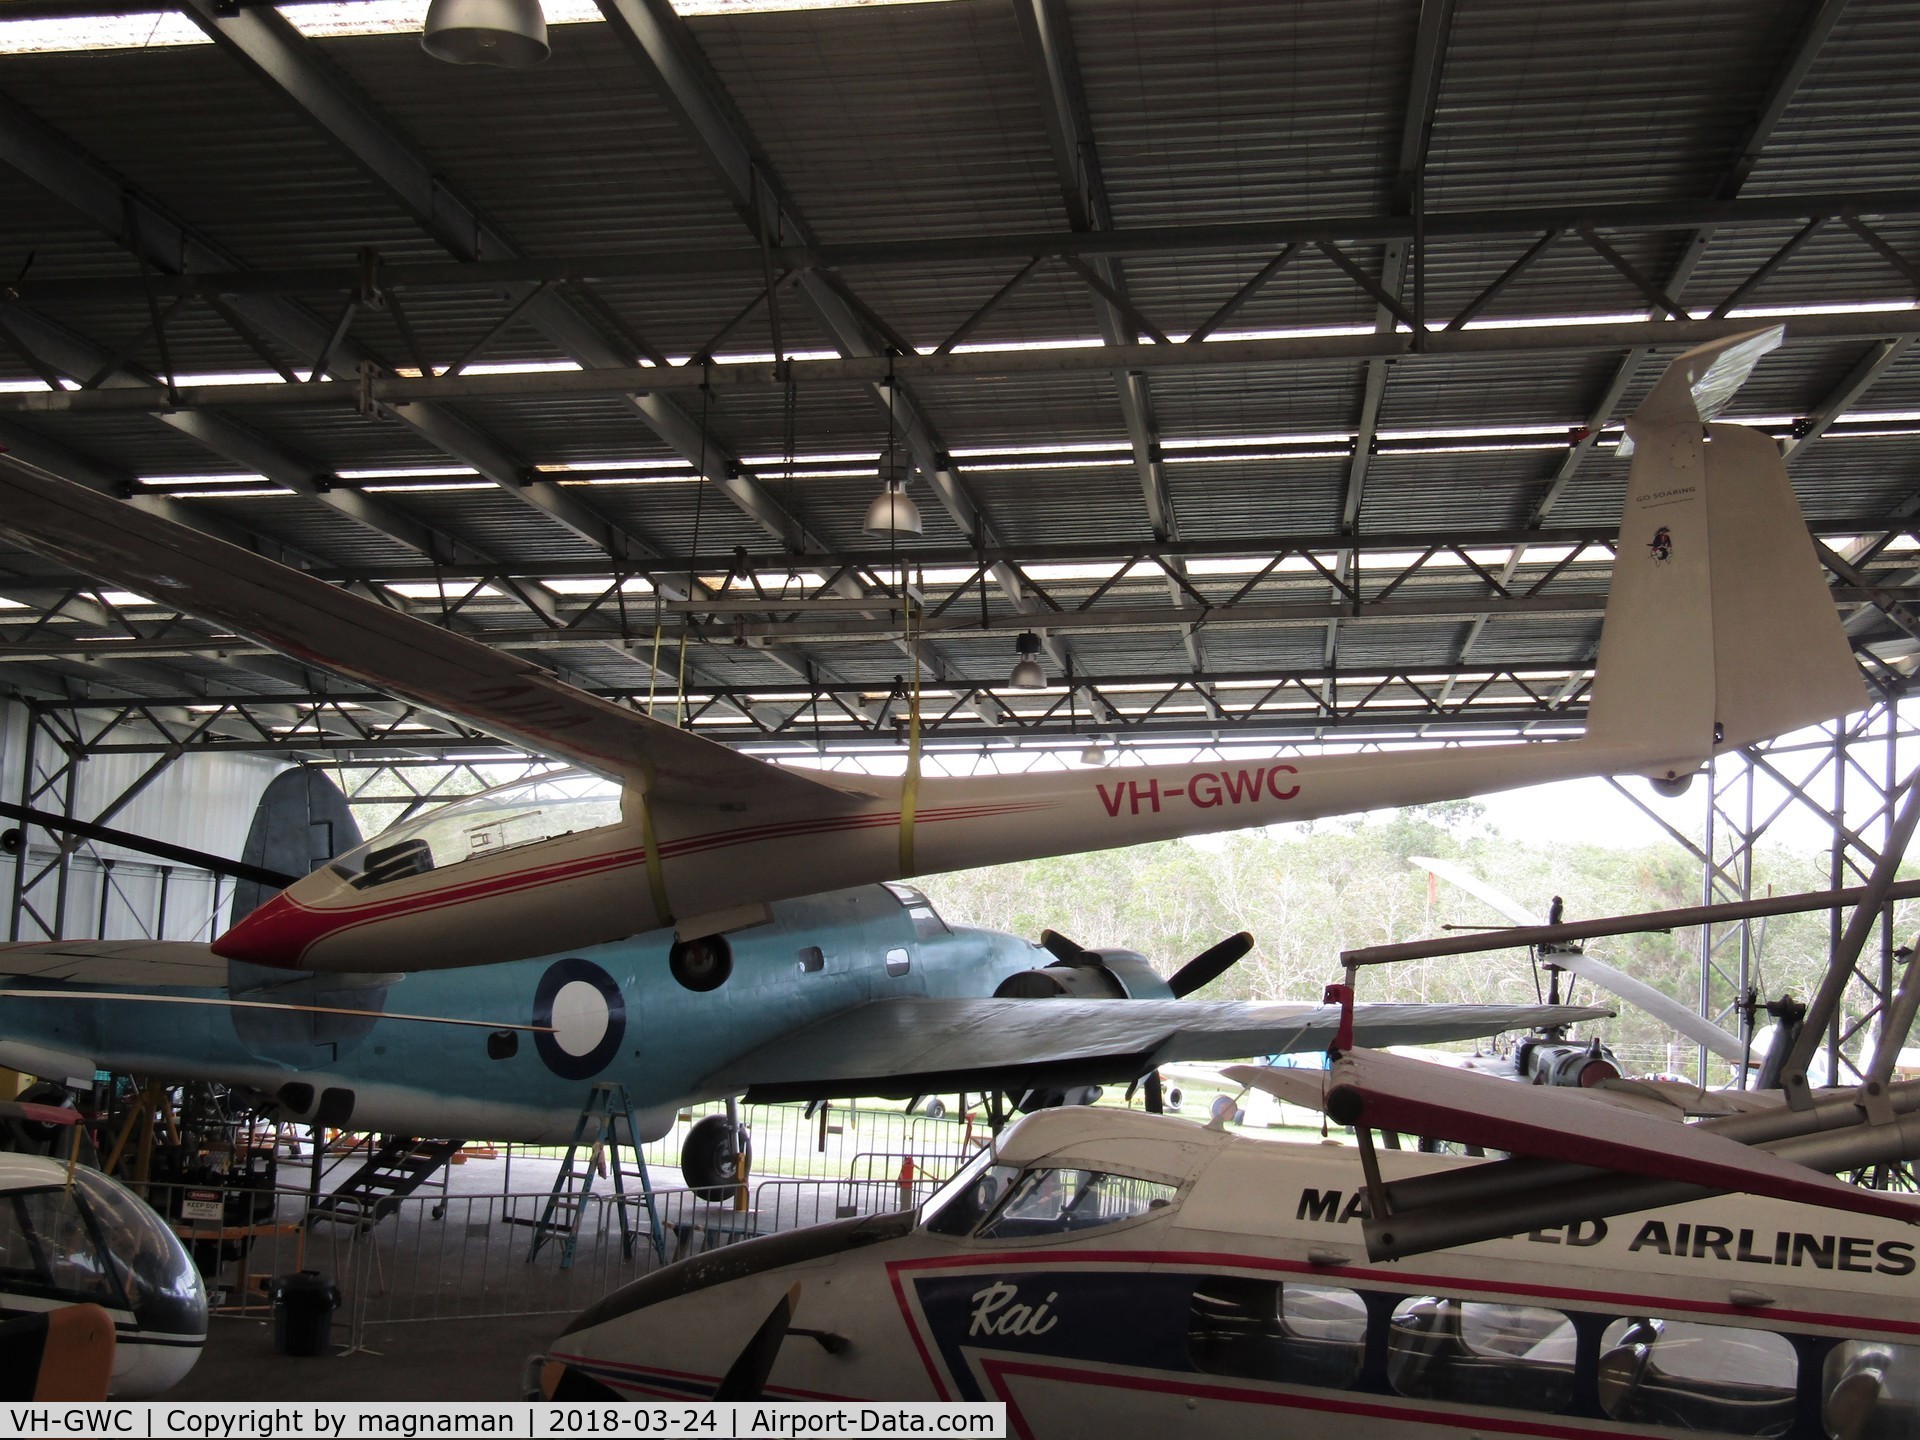 VH-GWC, 1975 ICA IS-29D C/N 050, in main hangar at caloundra museum- hanging around